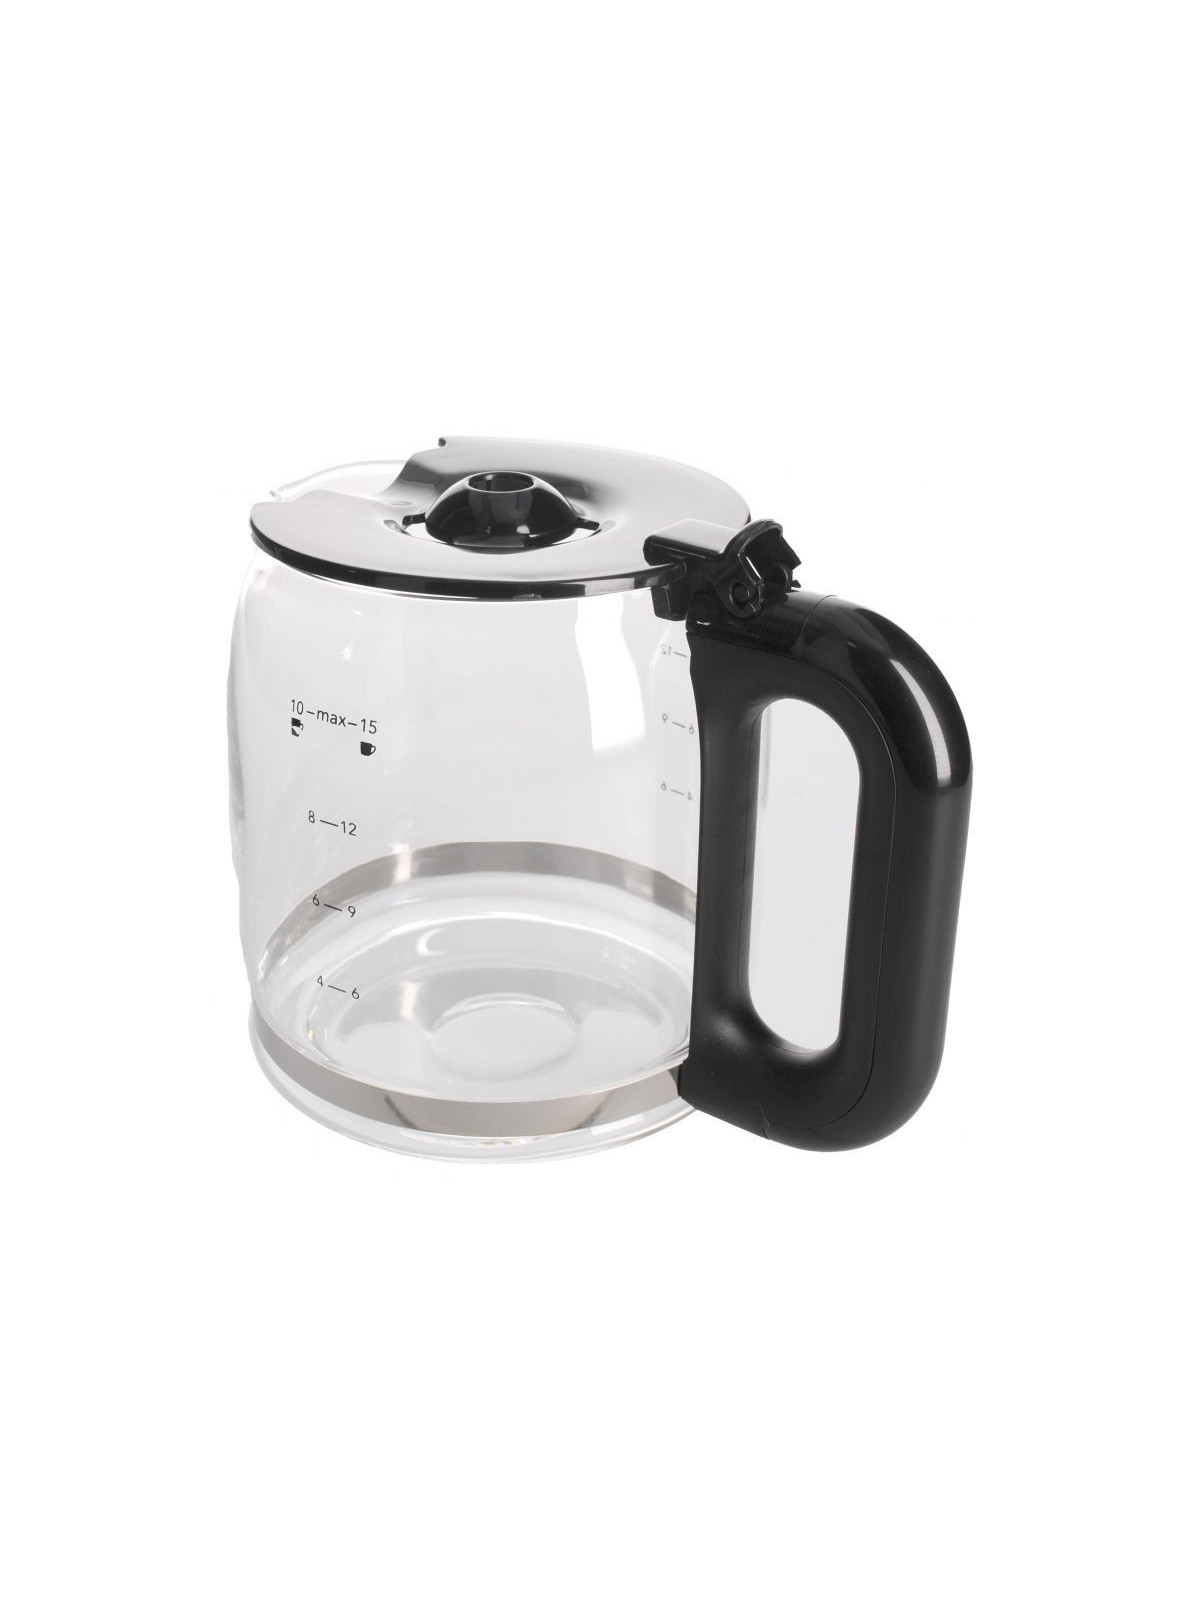 Verseuse Russell Hobbs Chester / Legacy - Cafetière